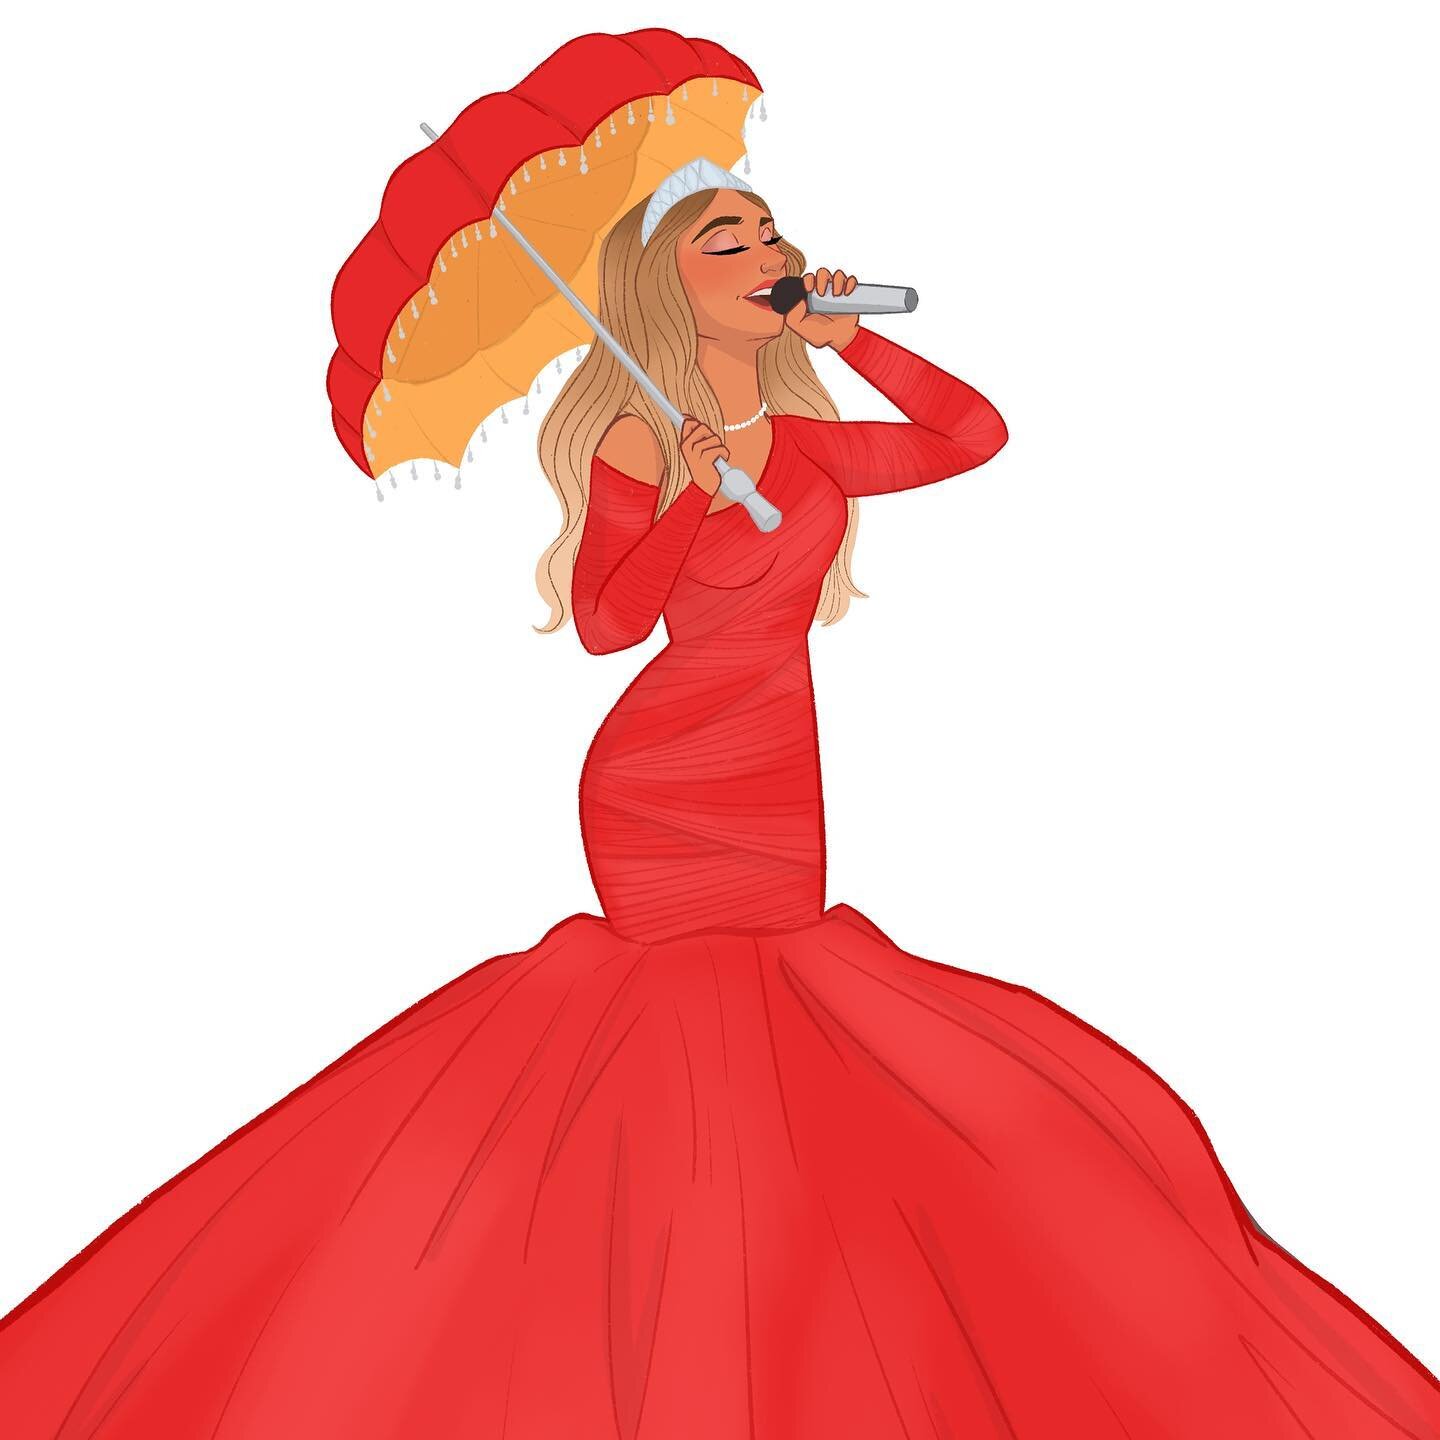 After seeing Mariah Carey during the Macy&rsquo;s Day Parade, I had to right?! Hope everyone had a wonderful Thanksgiving and let the holiday season merriment begin!
.
.
.
@mariahcarey #macysthanksgivingdayparade #thanksgiving #art #illustration #dig